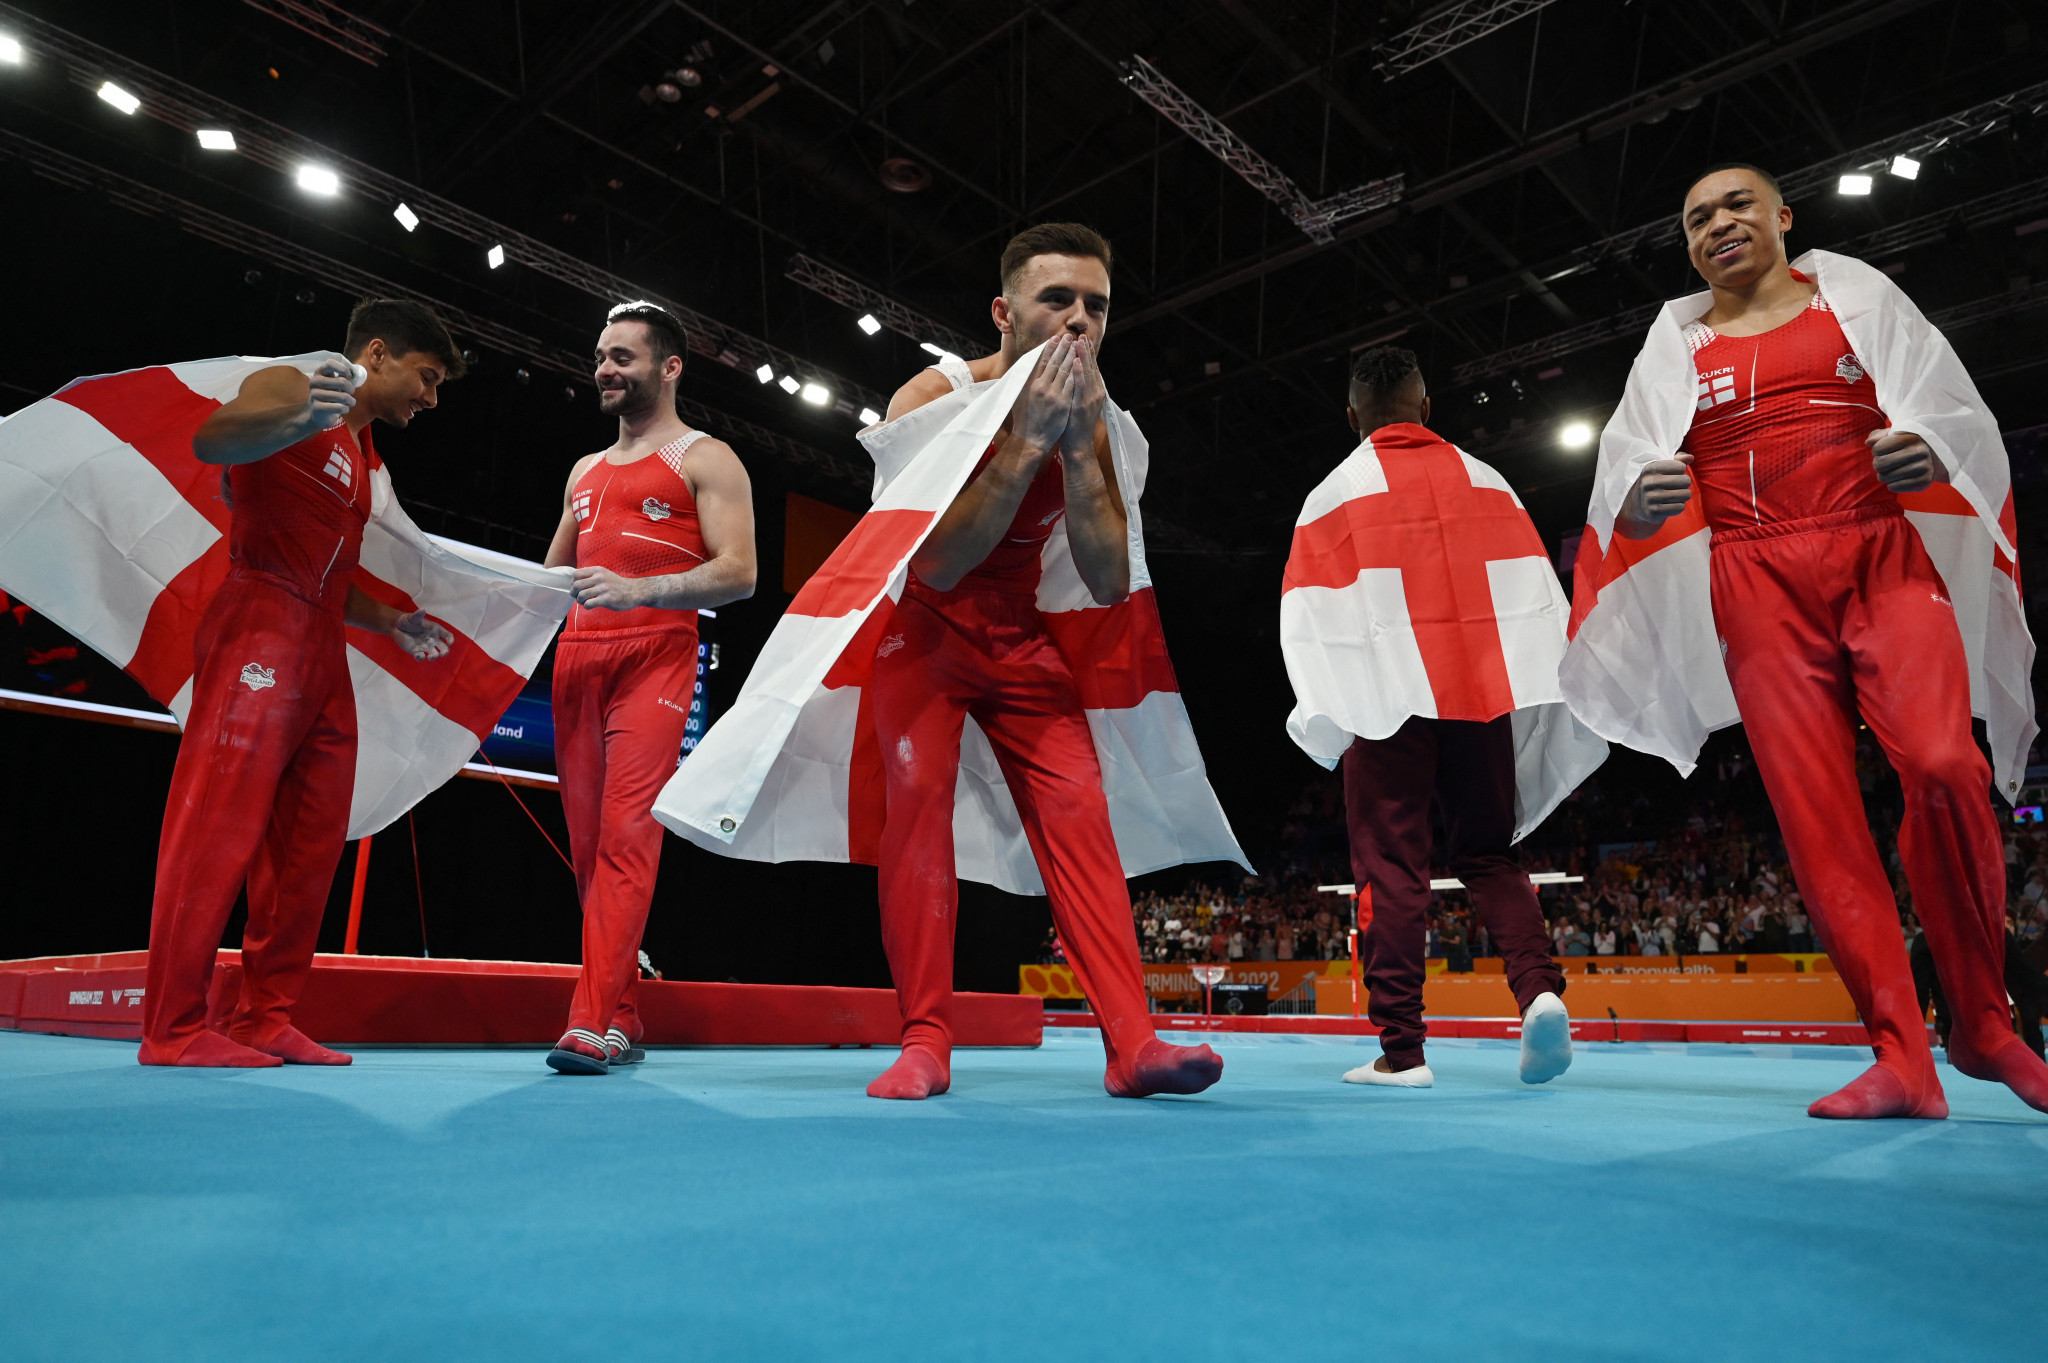 England's men's gymnastics team secured gold today in front of a home crowd ©Getty Images